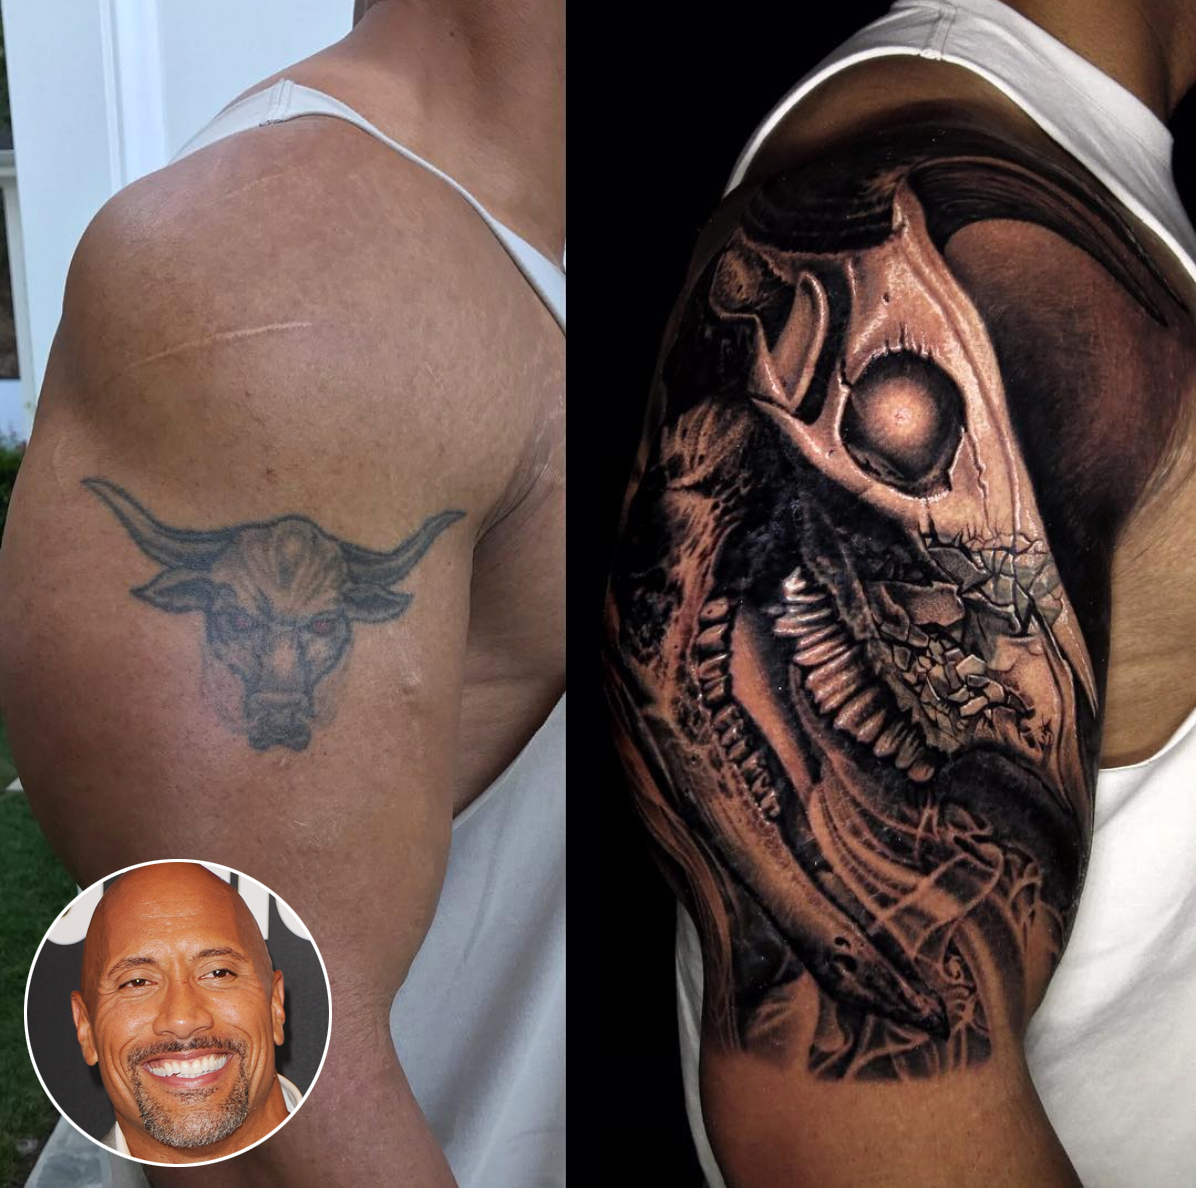 Dwayne The Rock Johnson Changed His Iconic Bull Tattoo People pertaining to measurements 1197 X 1188